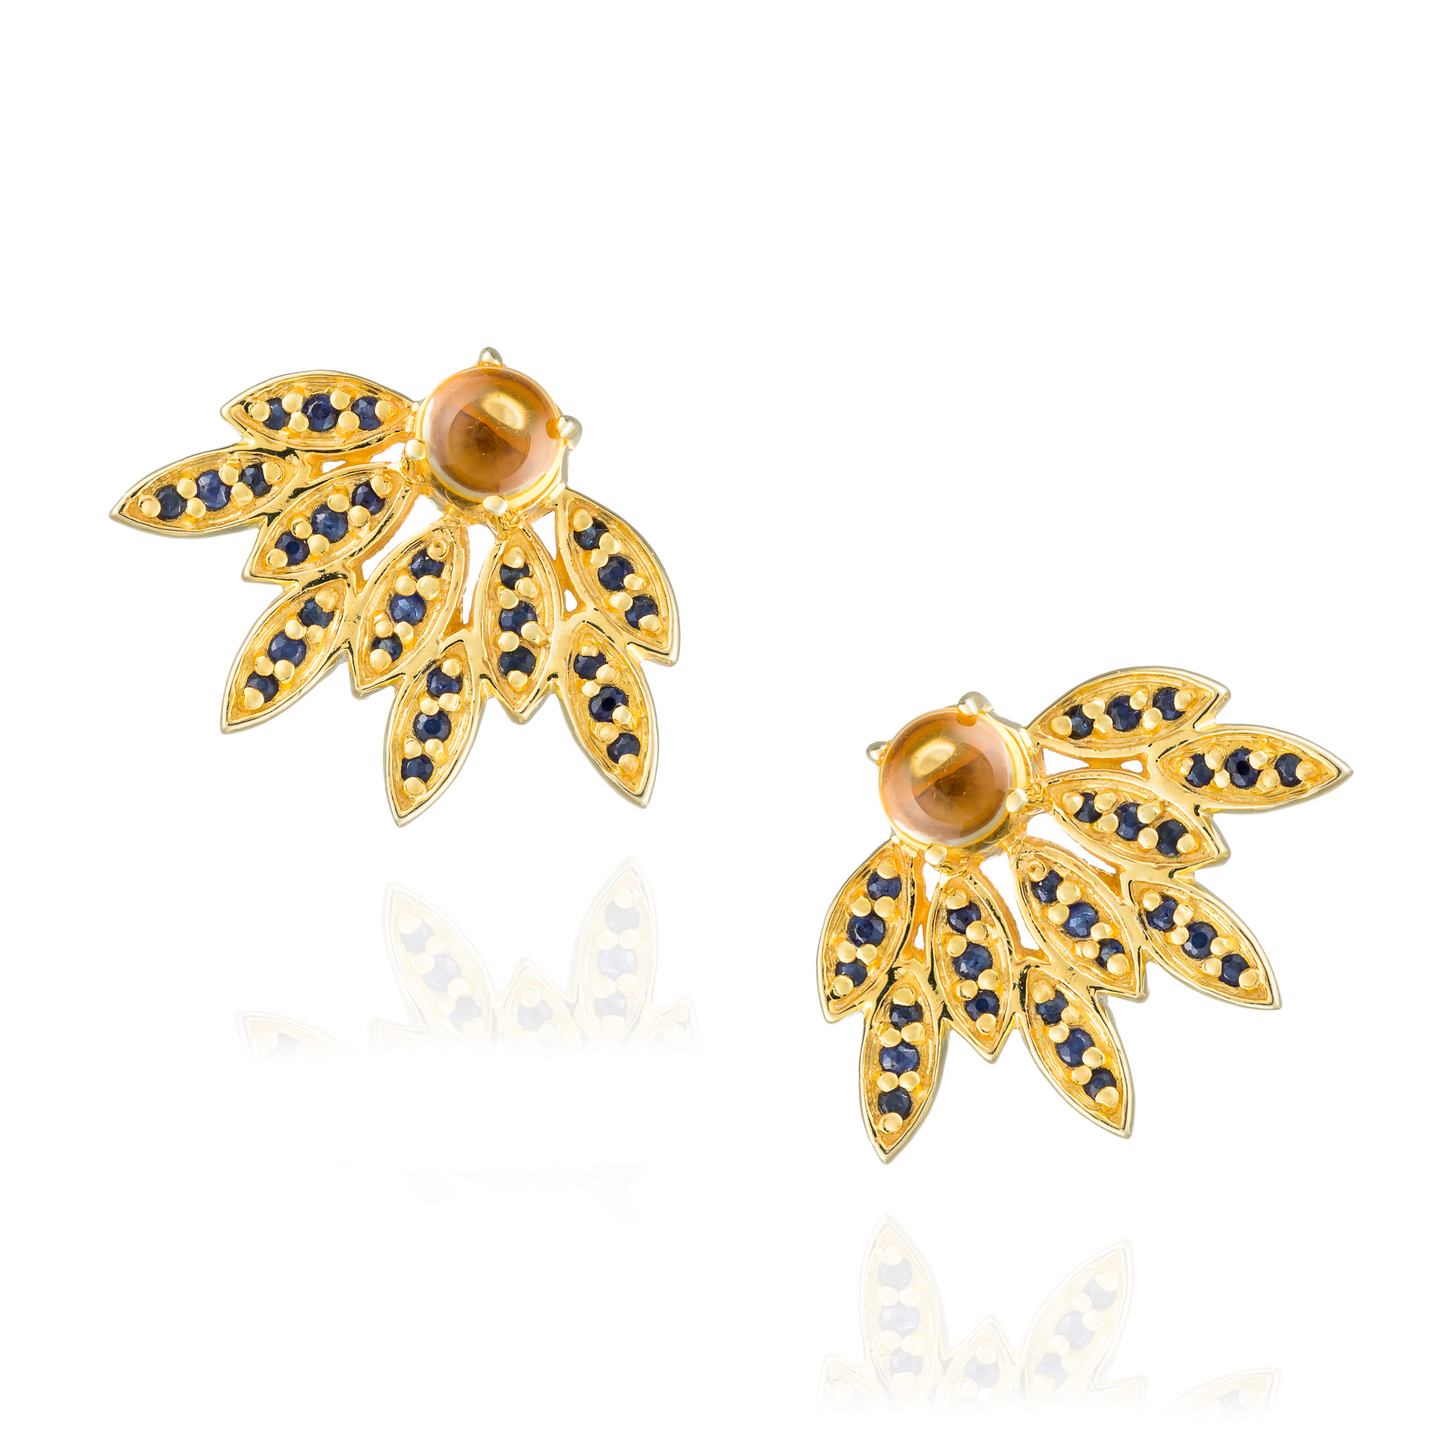 Load image into Gallery viewer, 925 Silver Earrings  Yellow Gold Plated with Citrine Cabouchon and Blue Sapphires
